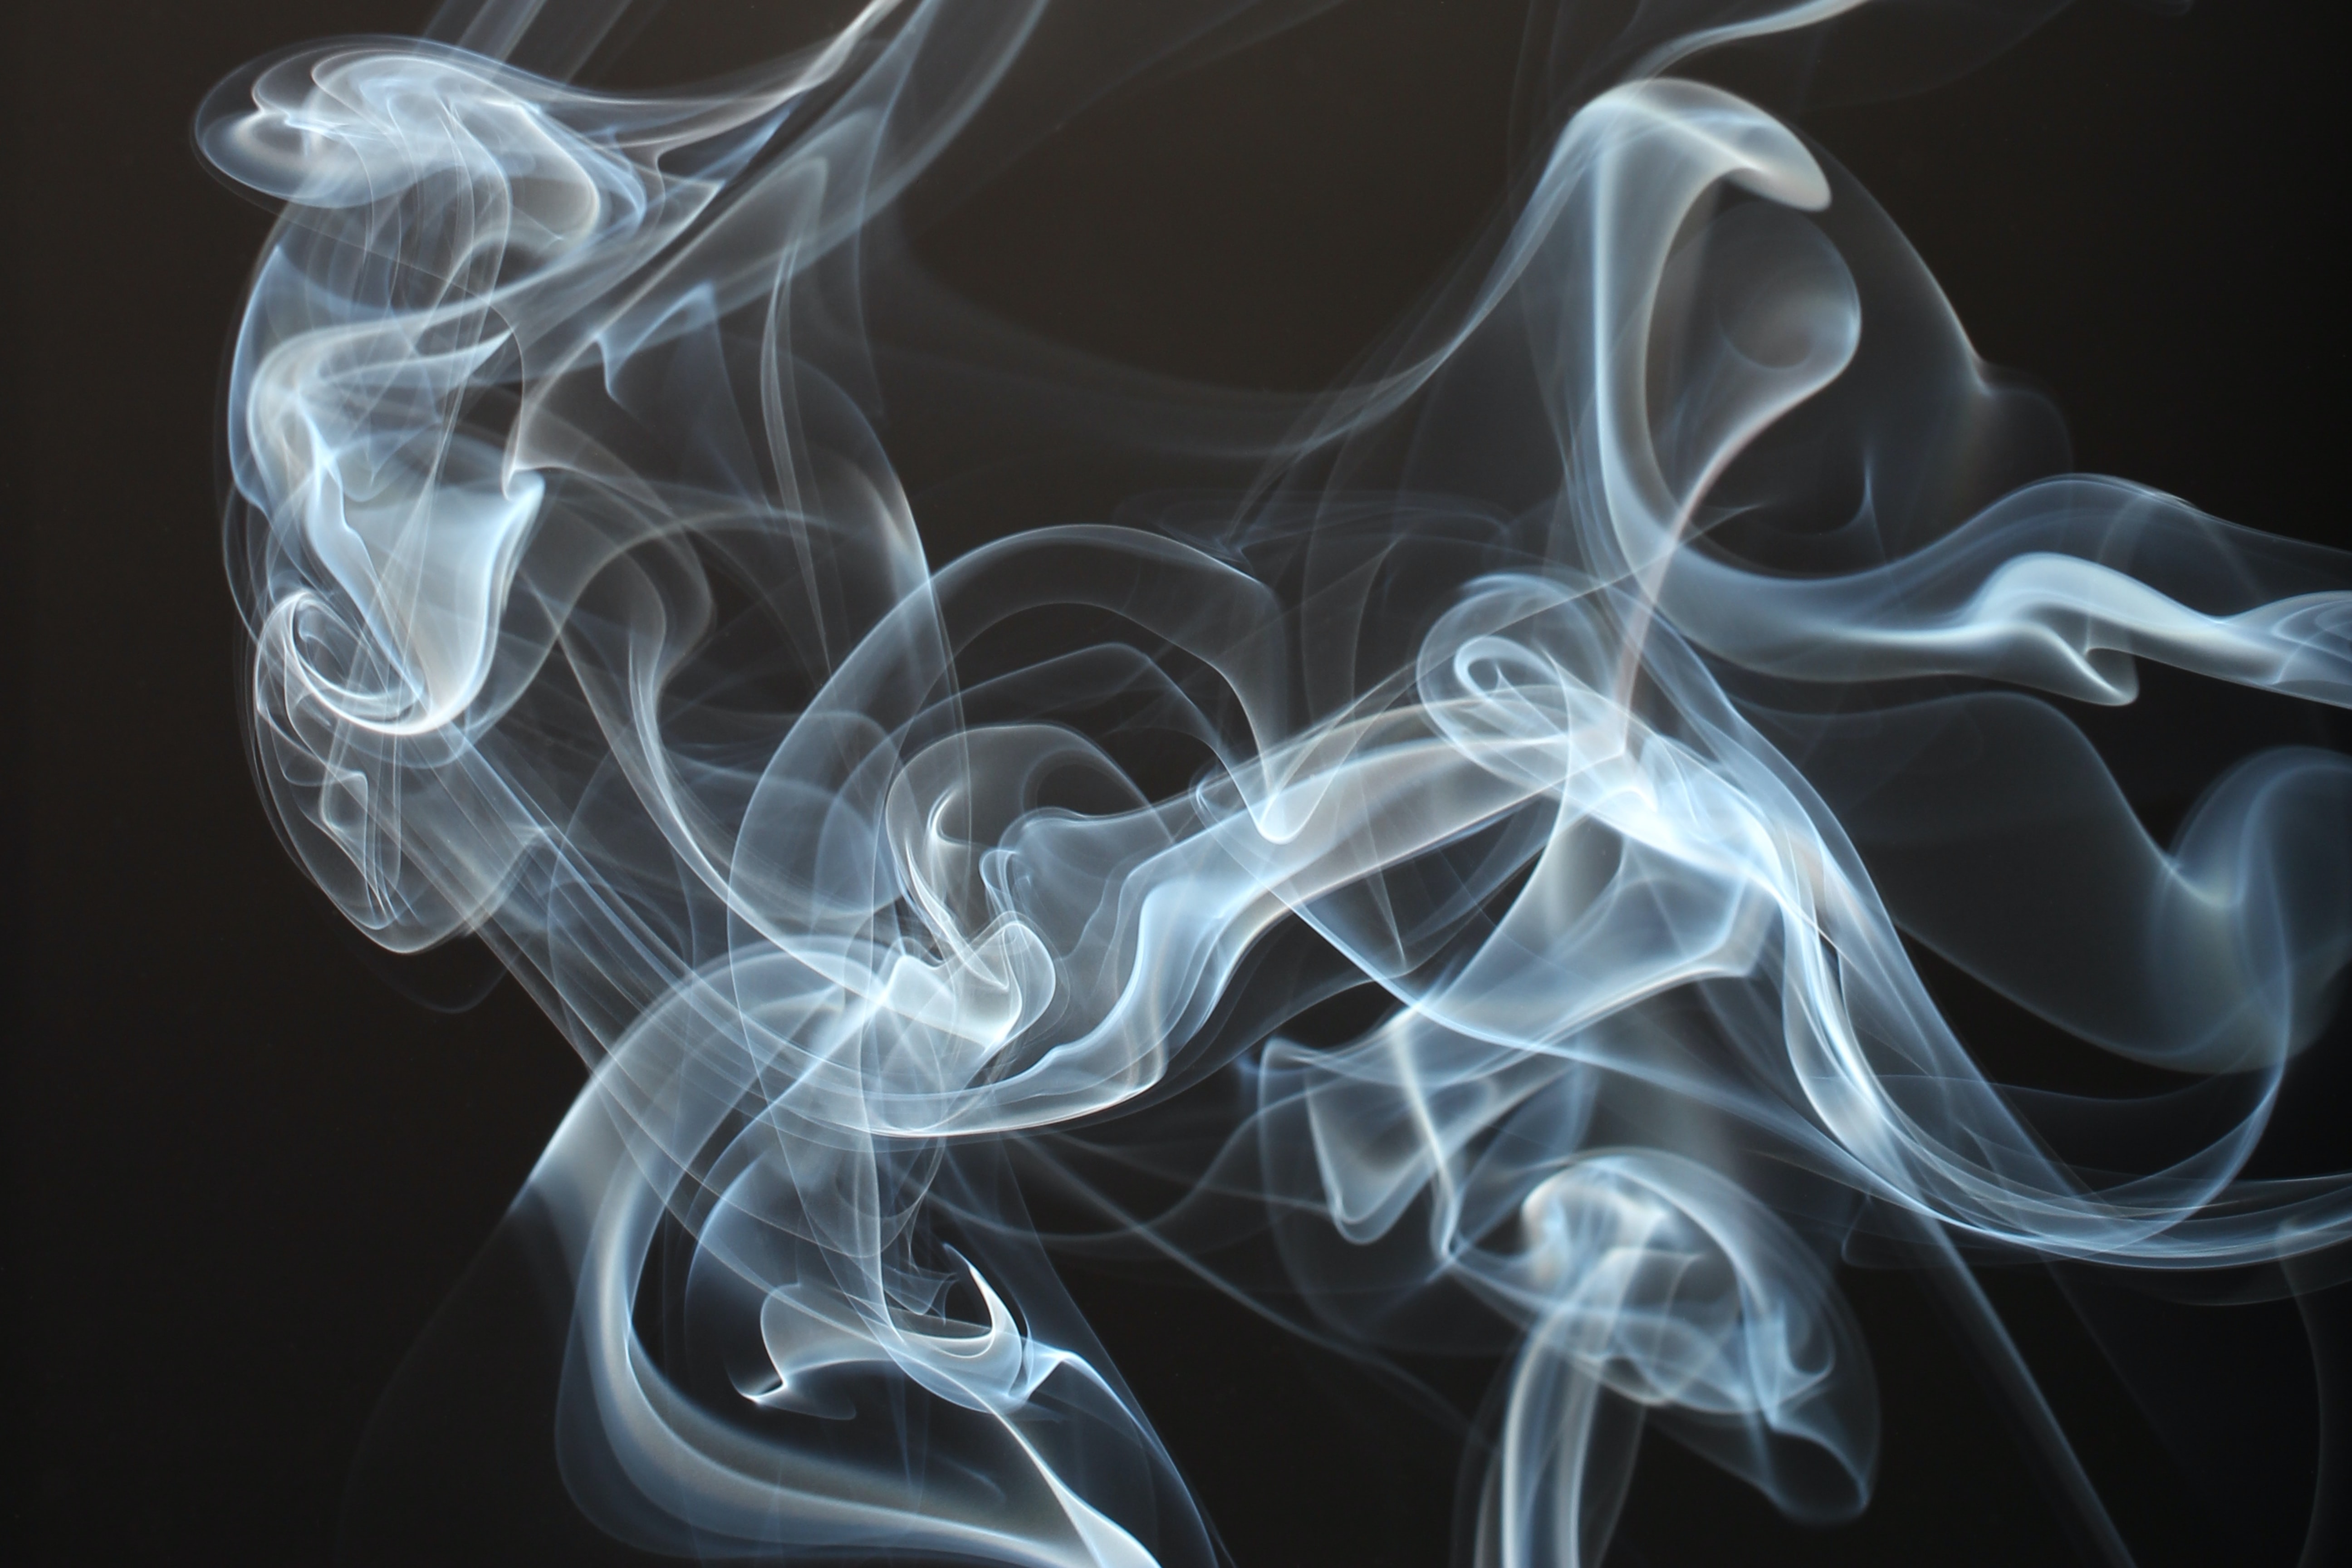 Is the second-hand smoke of e-cigarettes harmful?